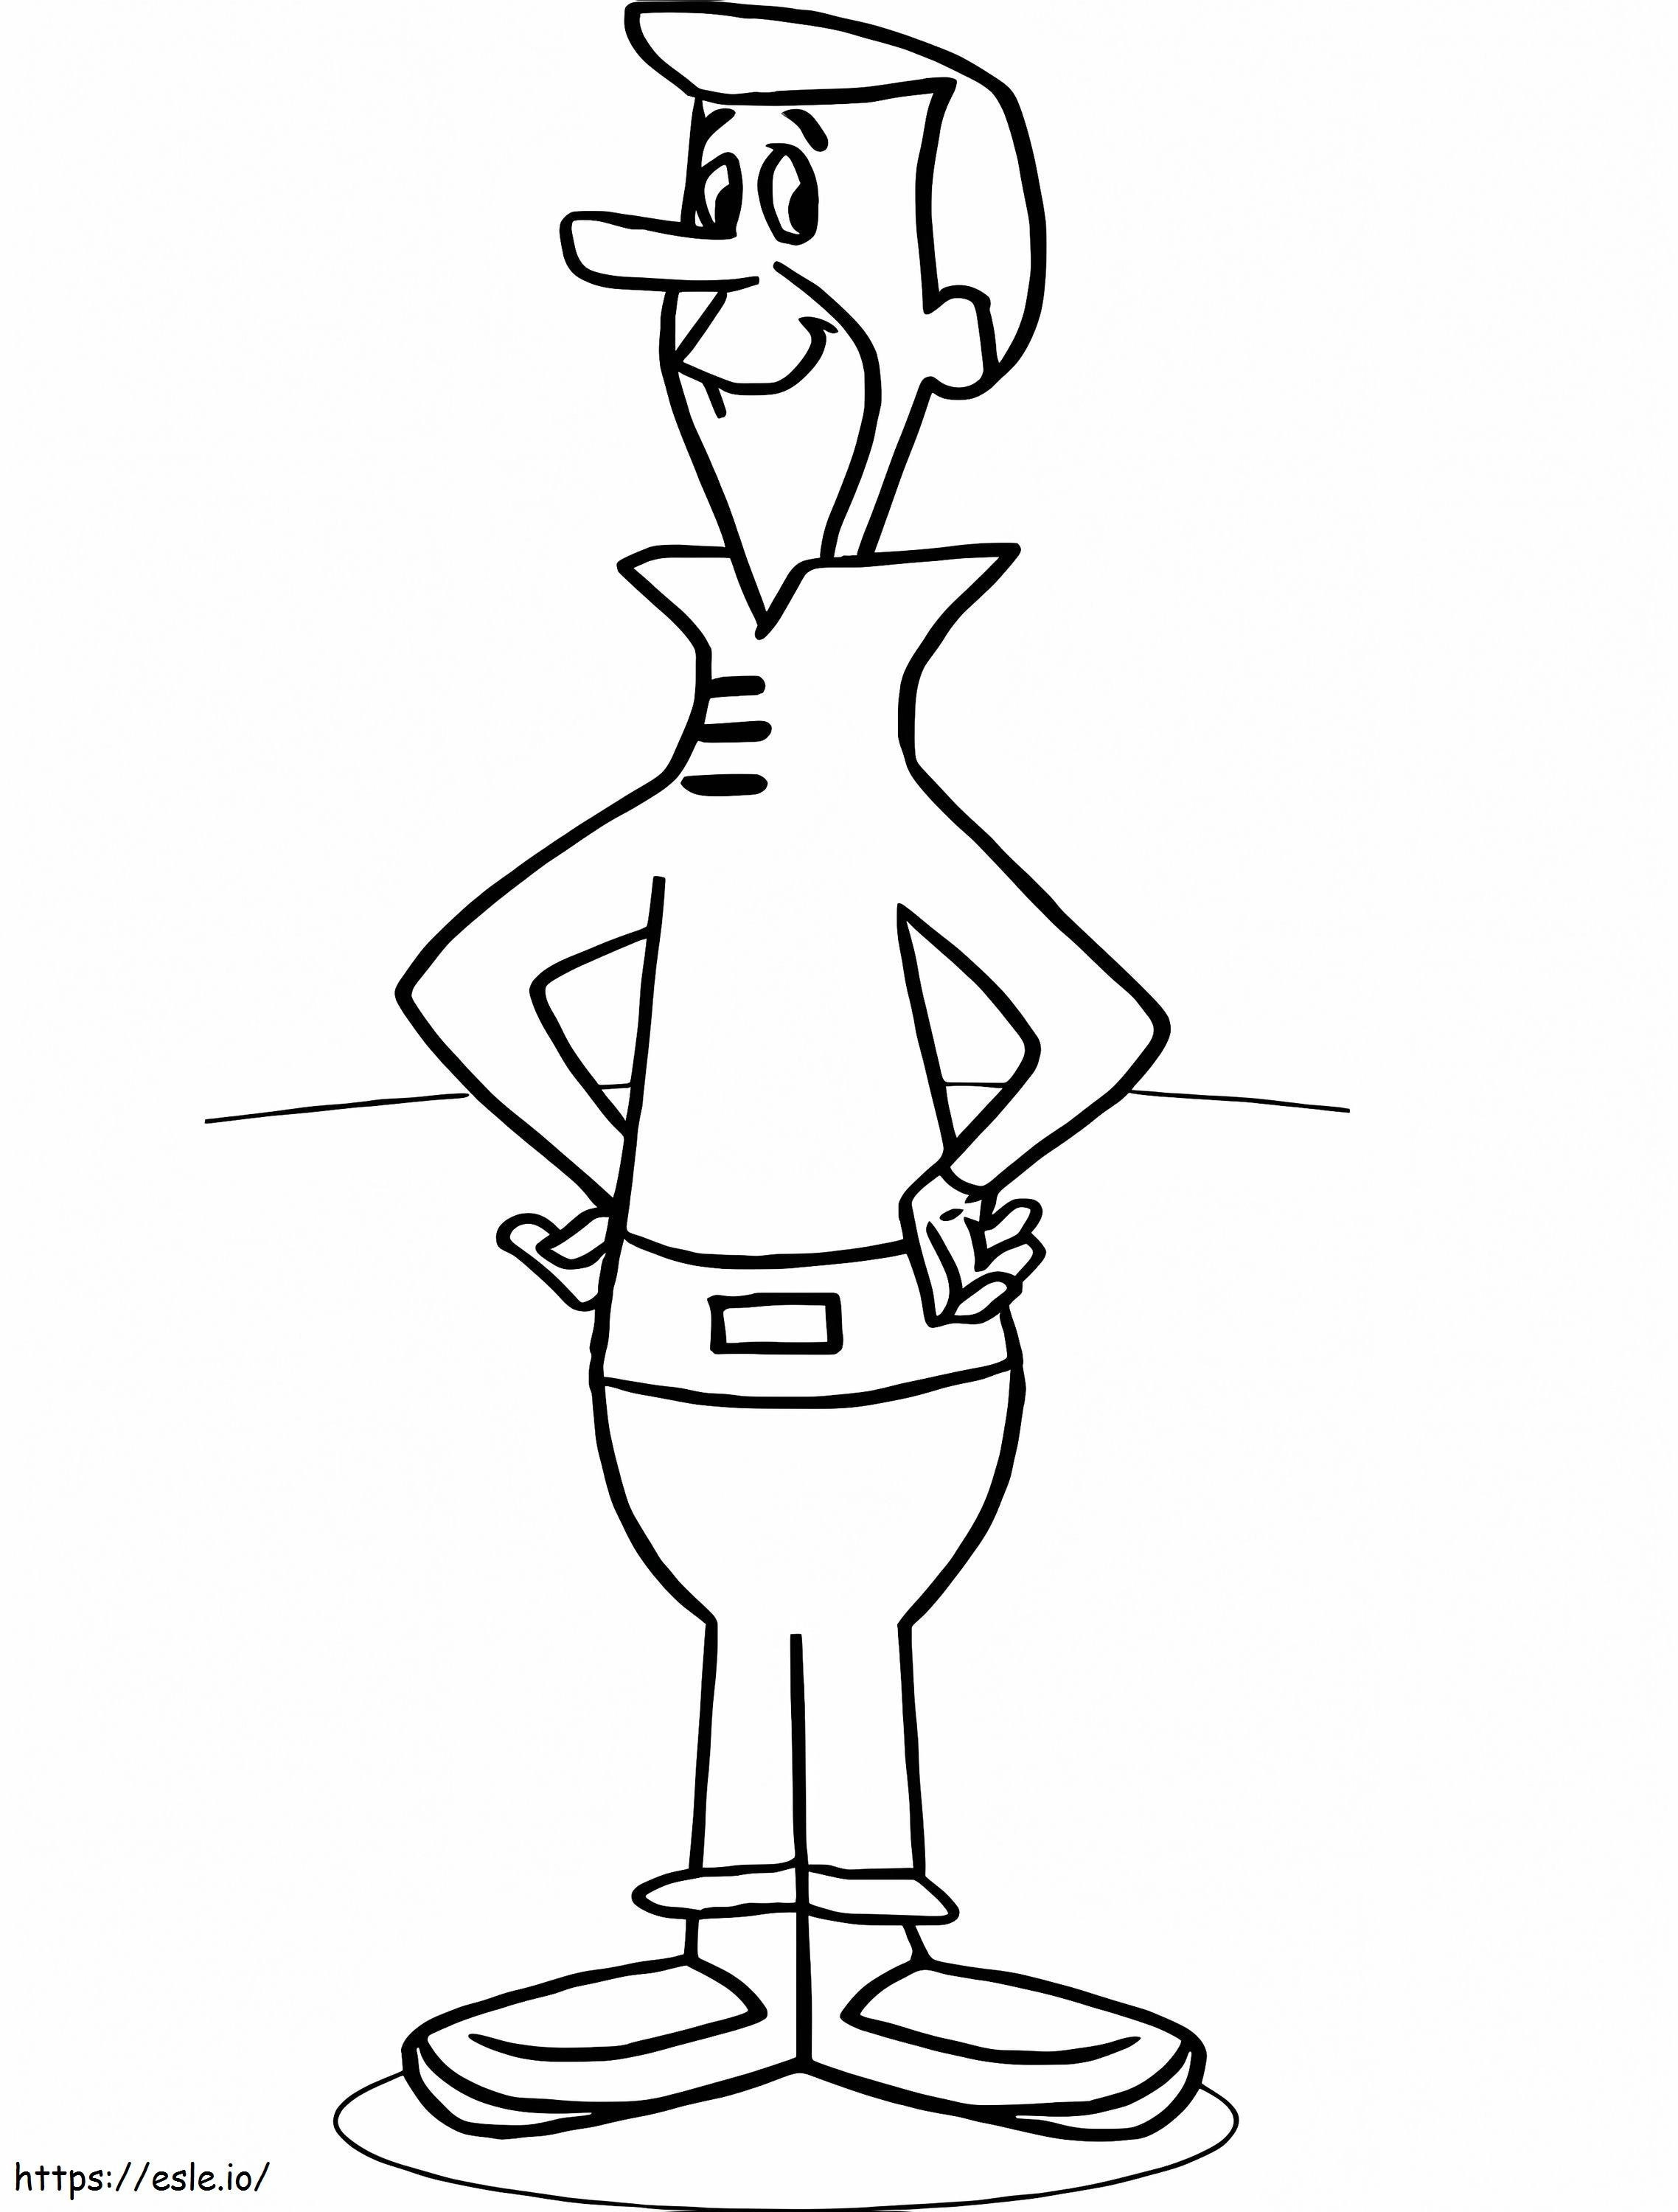 George Jetson 1 coloring page